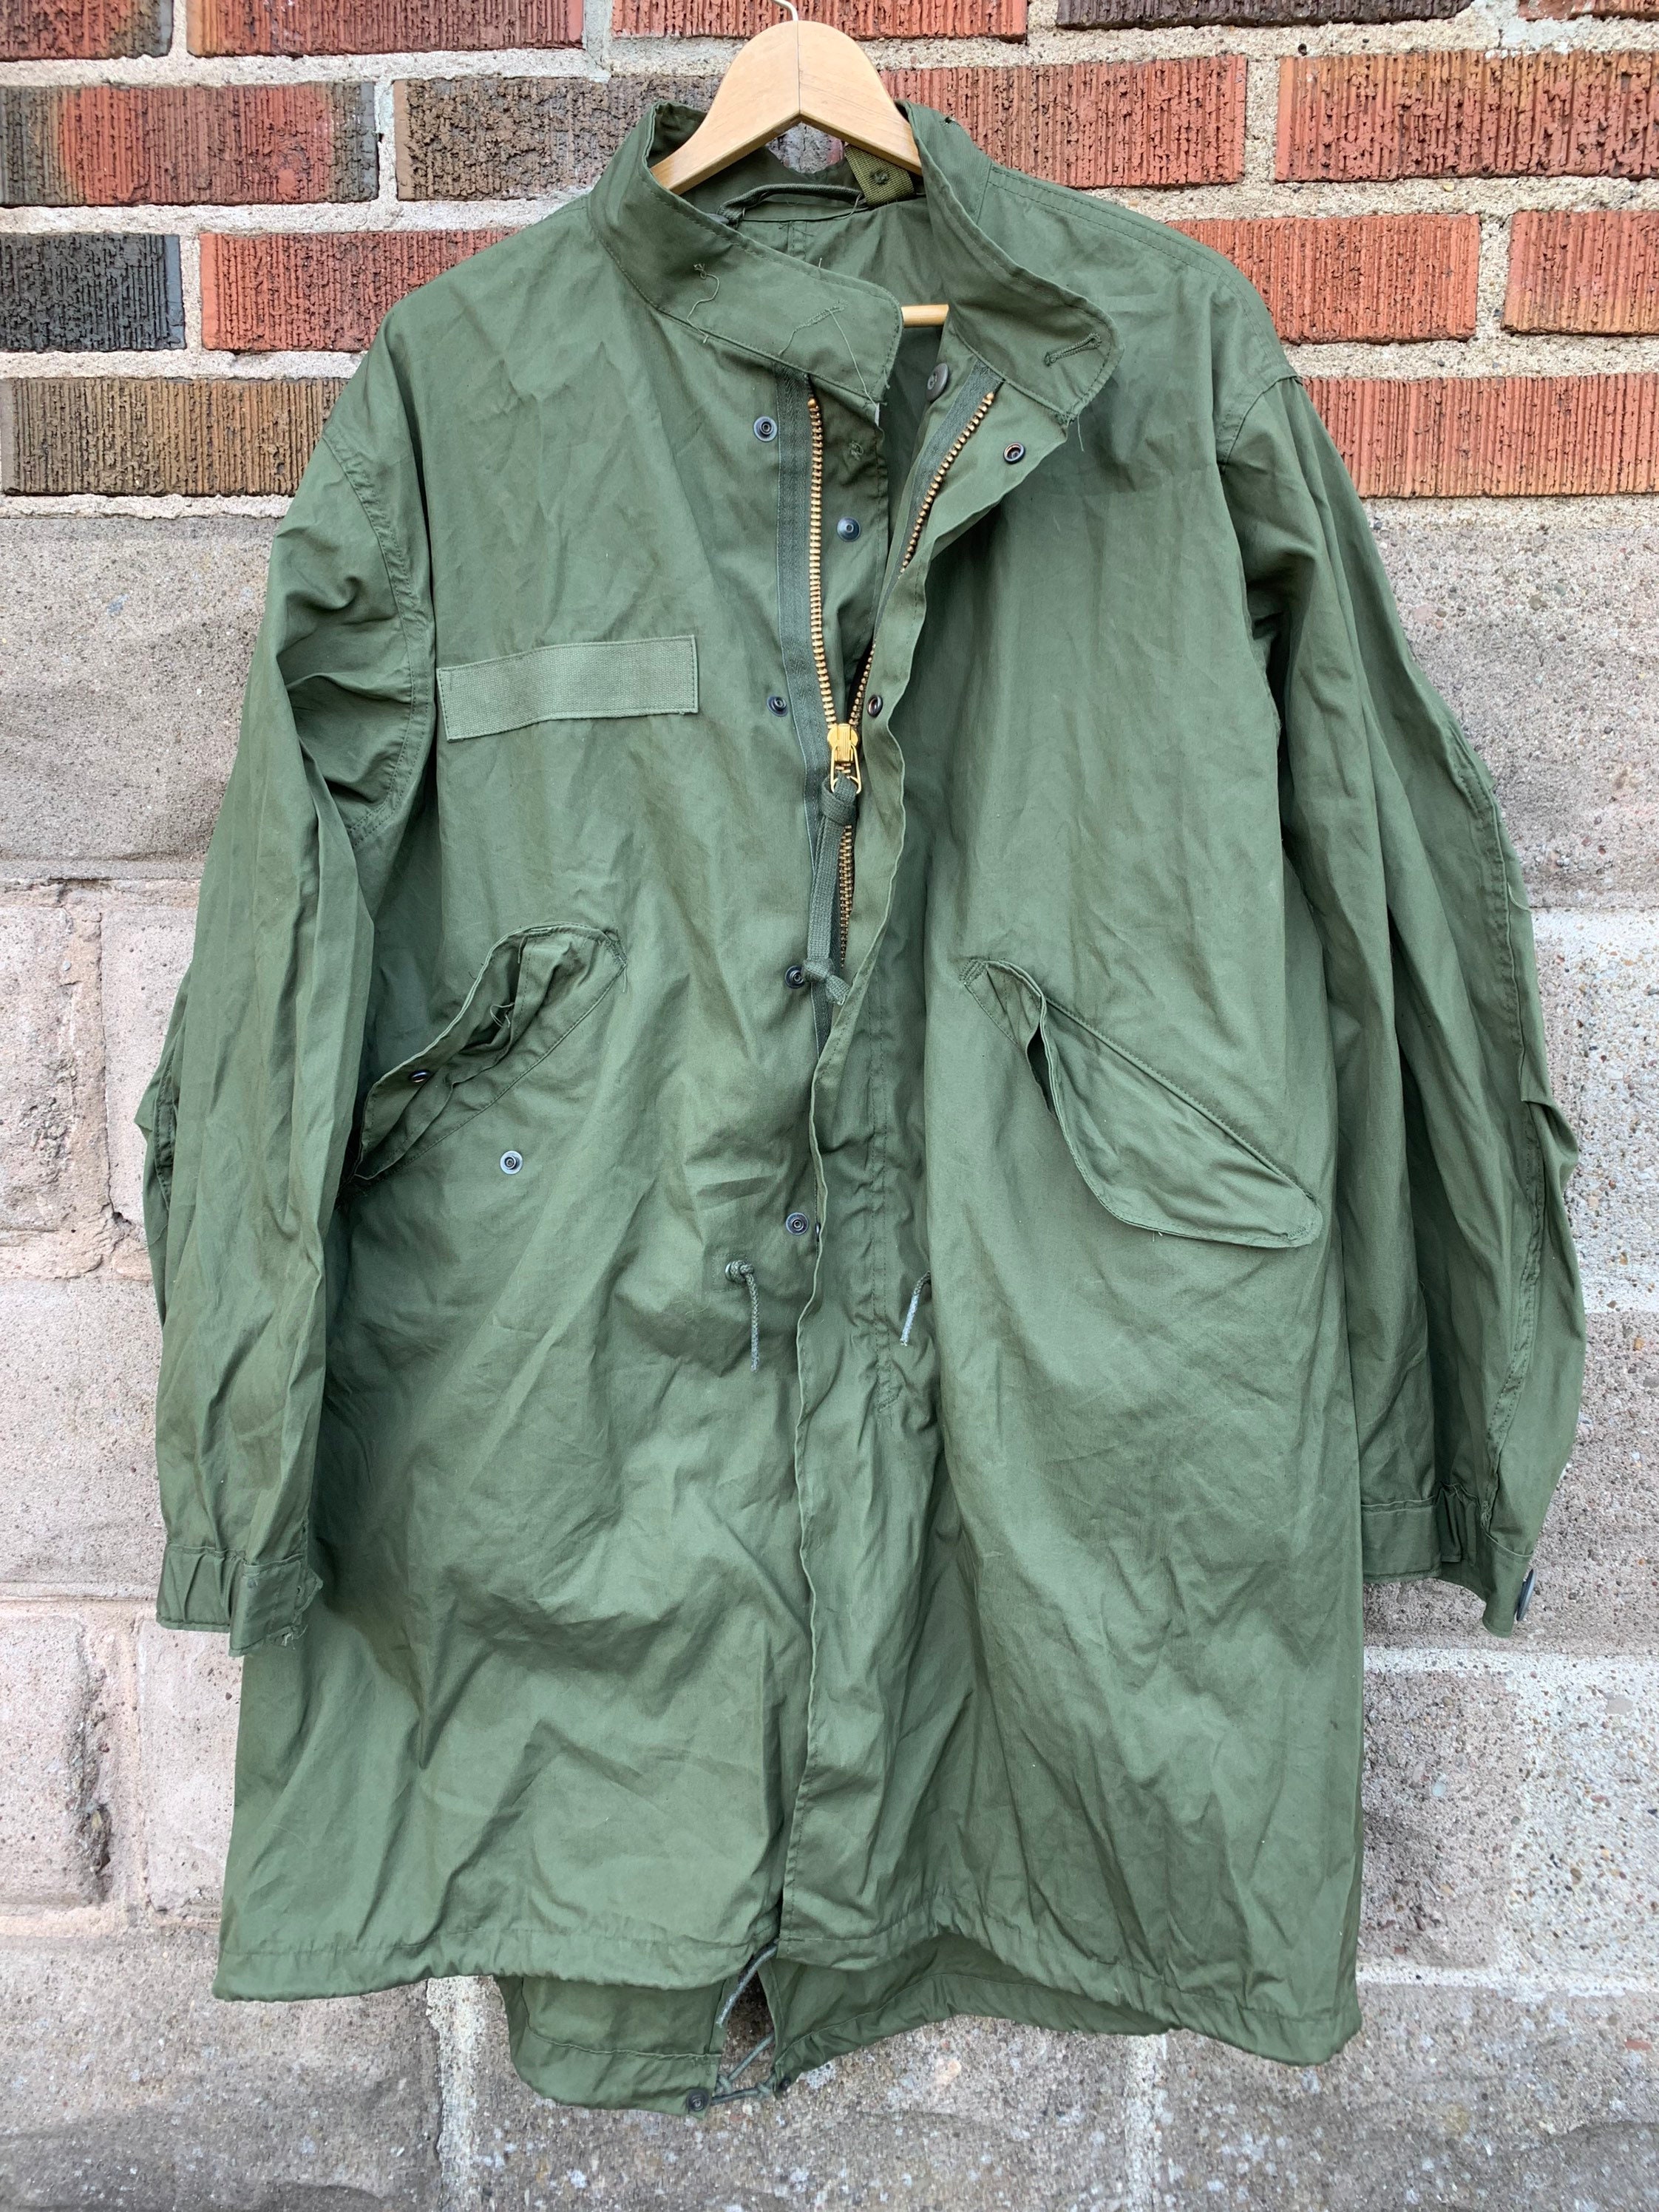 Fishtail Parka Genuine 1978 US Army Issued Size Mens Medium